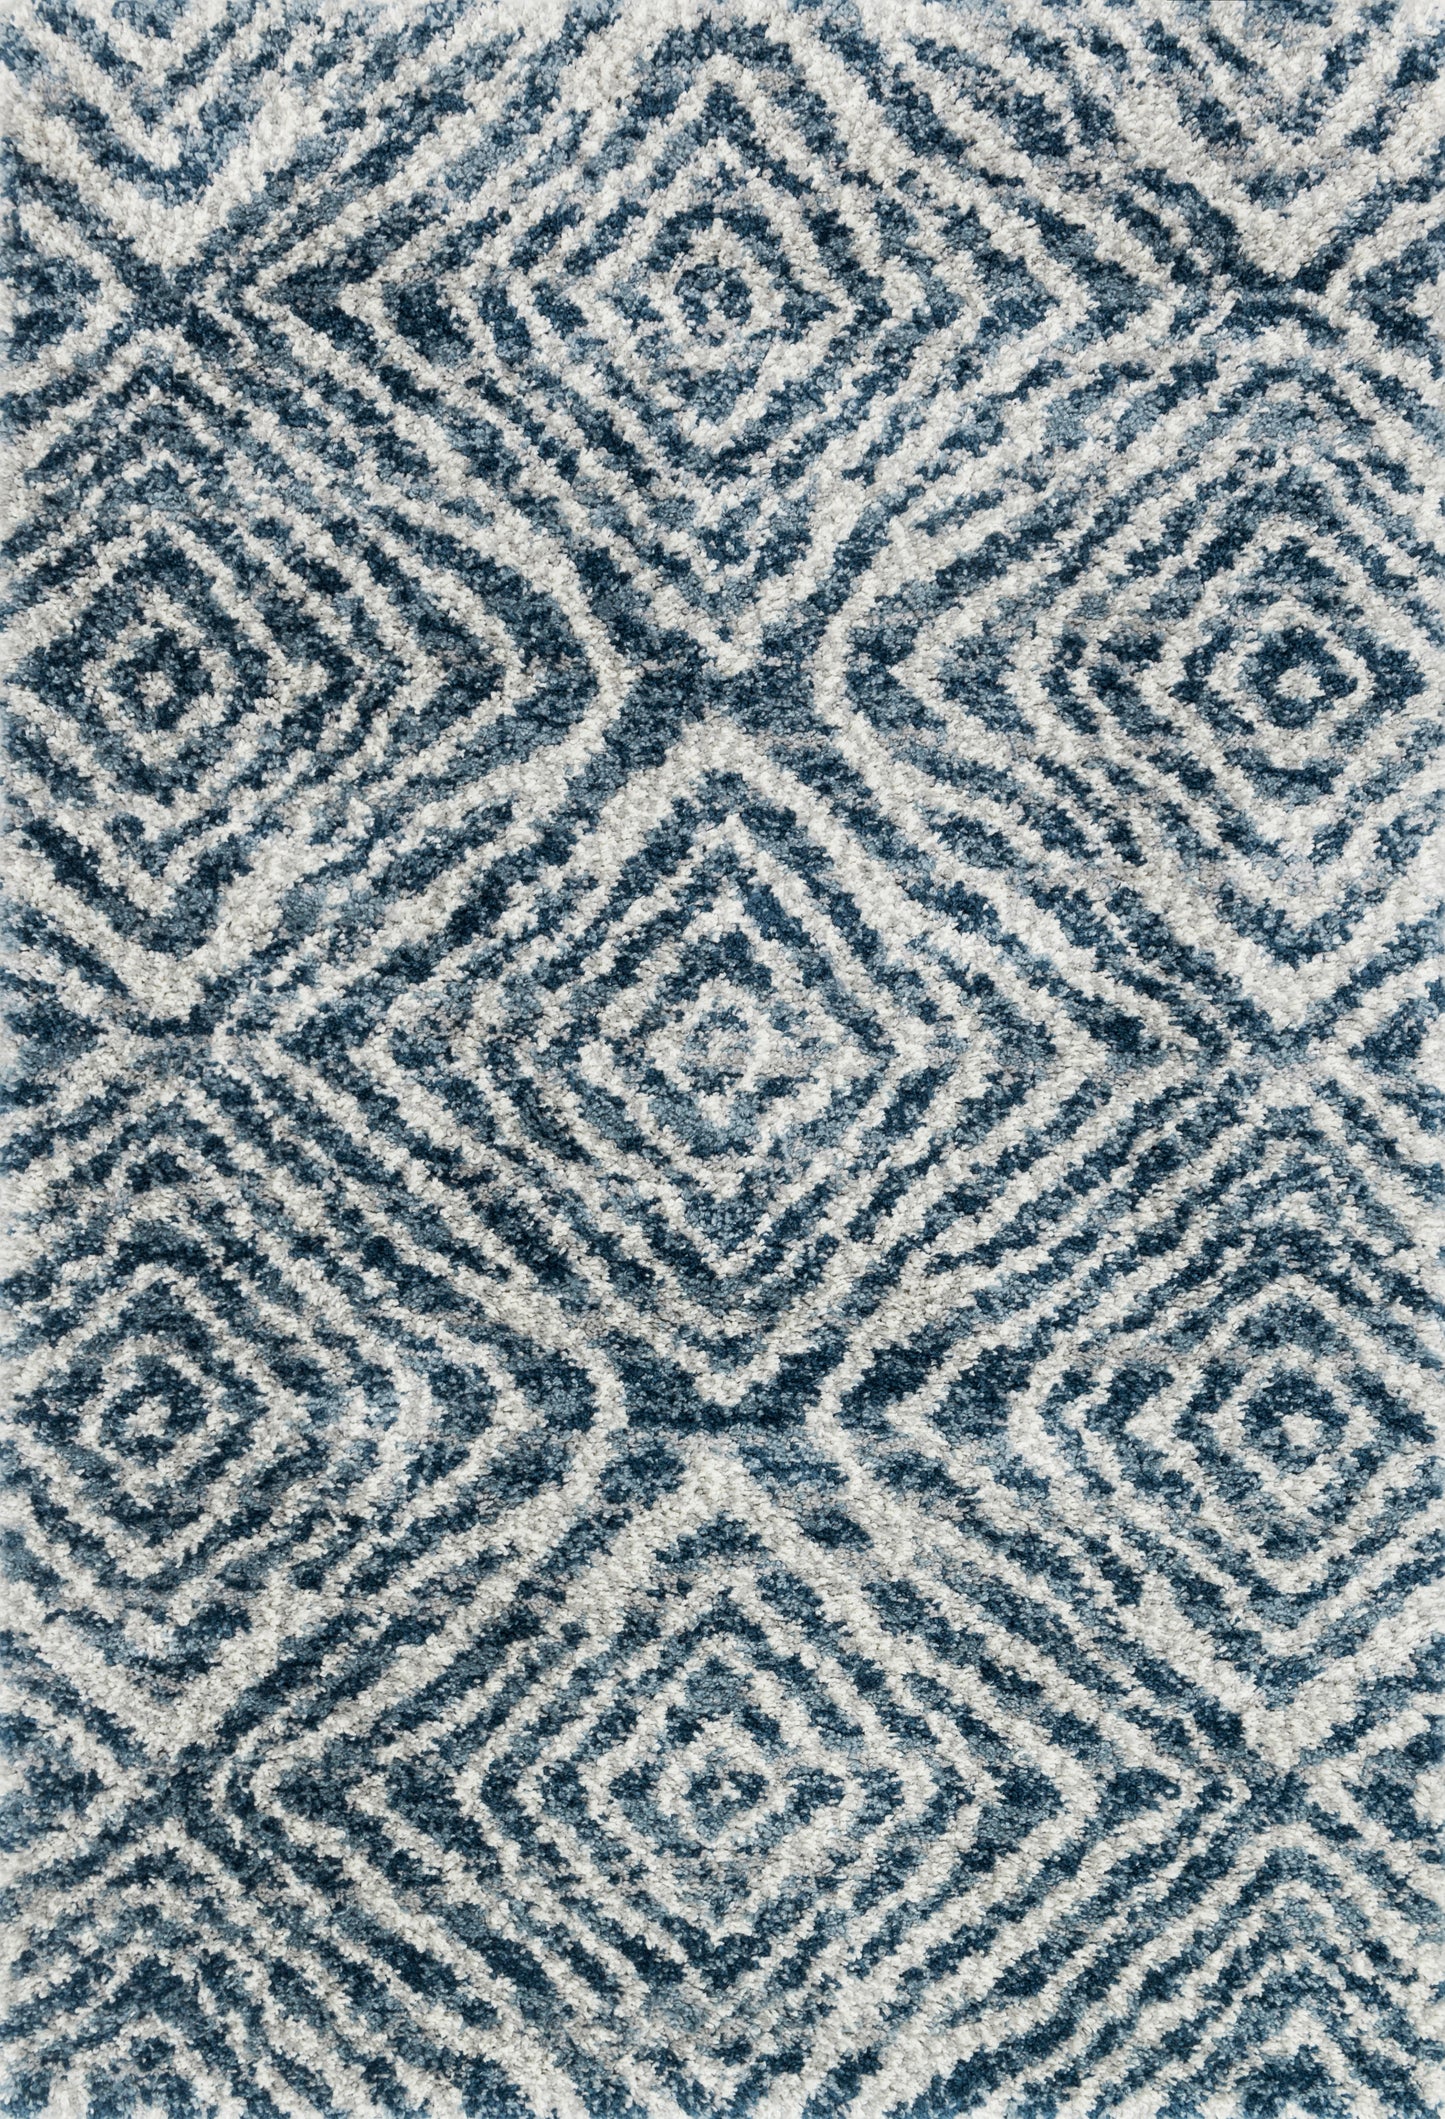 A picture of Loloi's Quincy rug, in style QC-01, color Ocean / Pebble